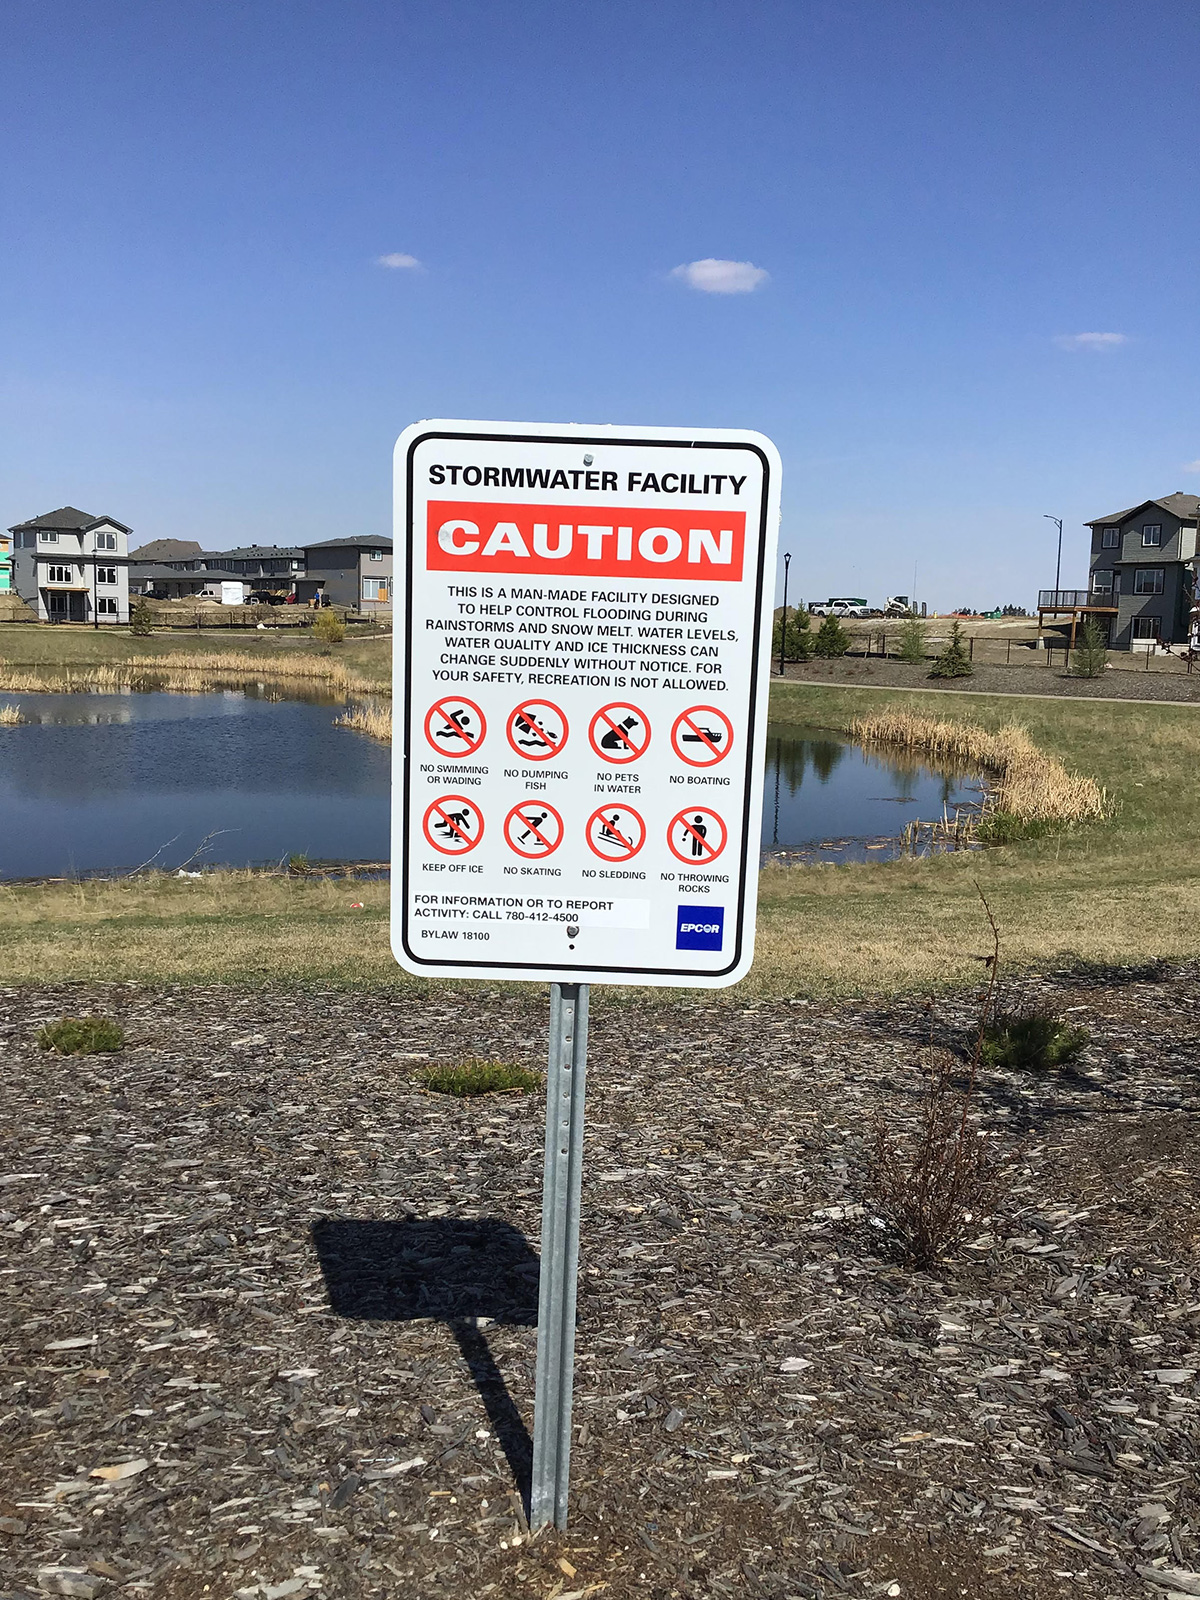 A sign at a stormwater facility at normal water level